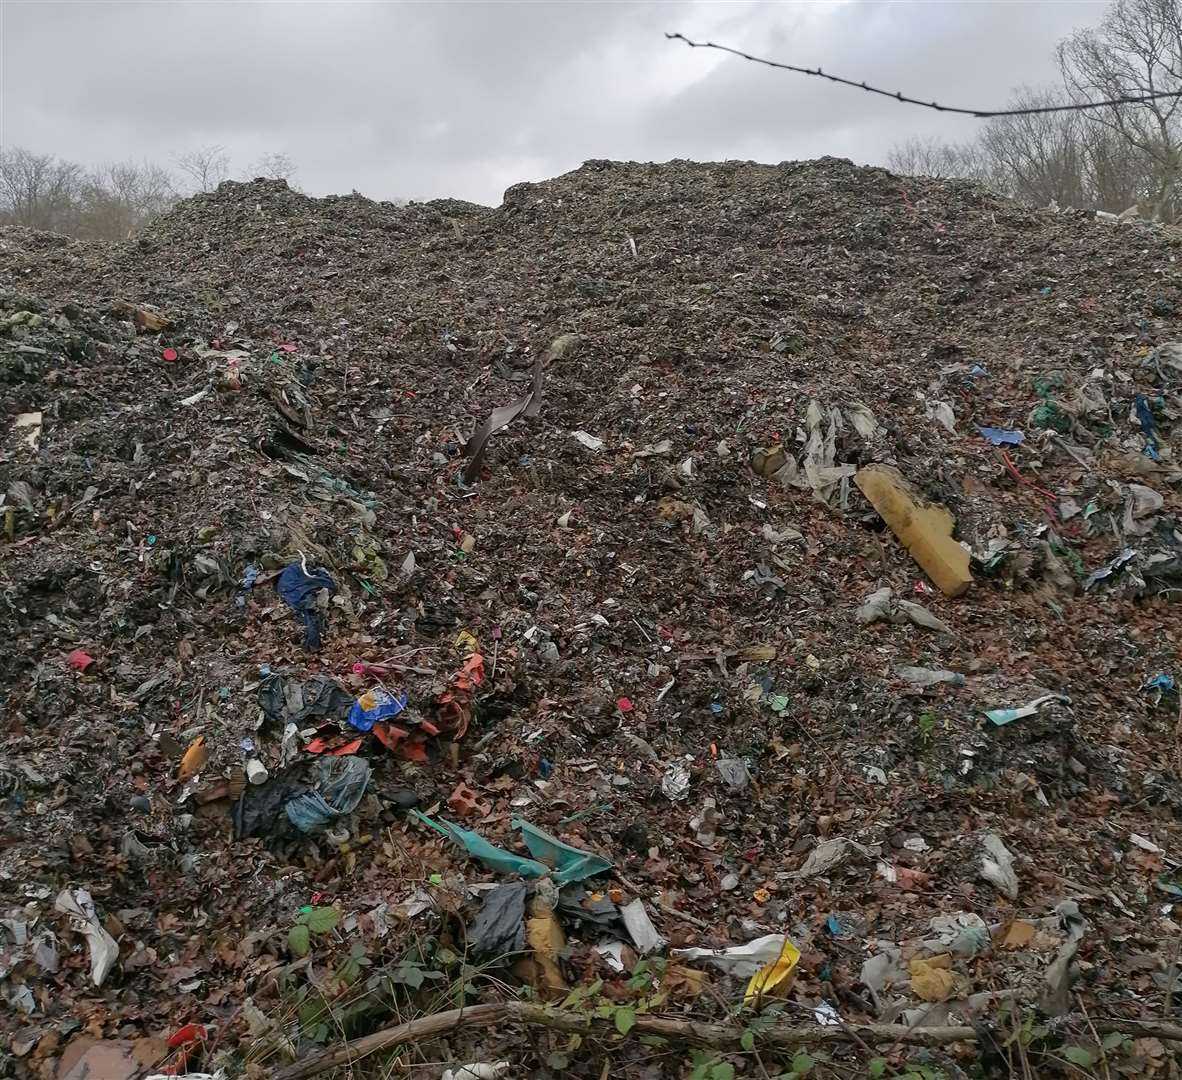 A resident who shared pictures with KentOnline said the waste covers an area of four acres in Hoad’s Wood